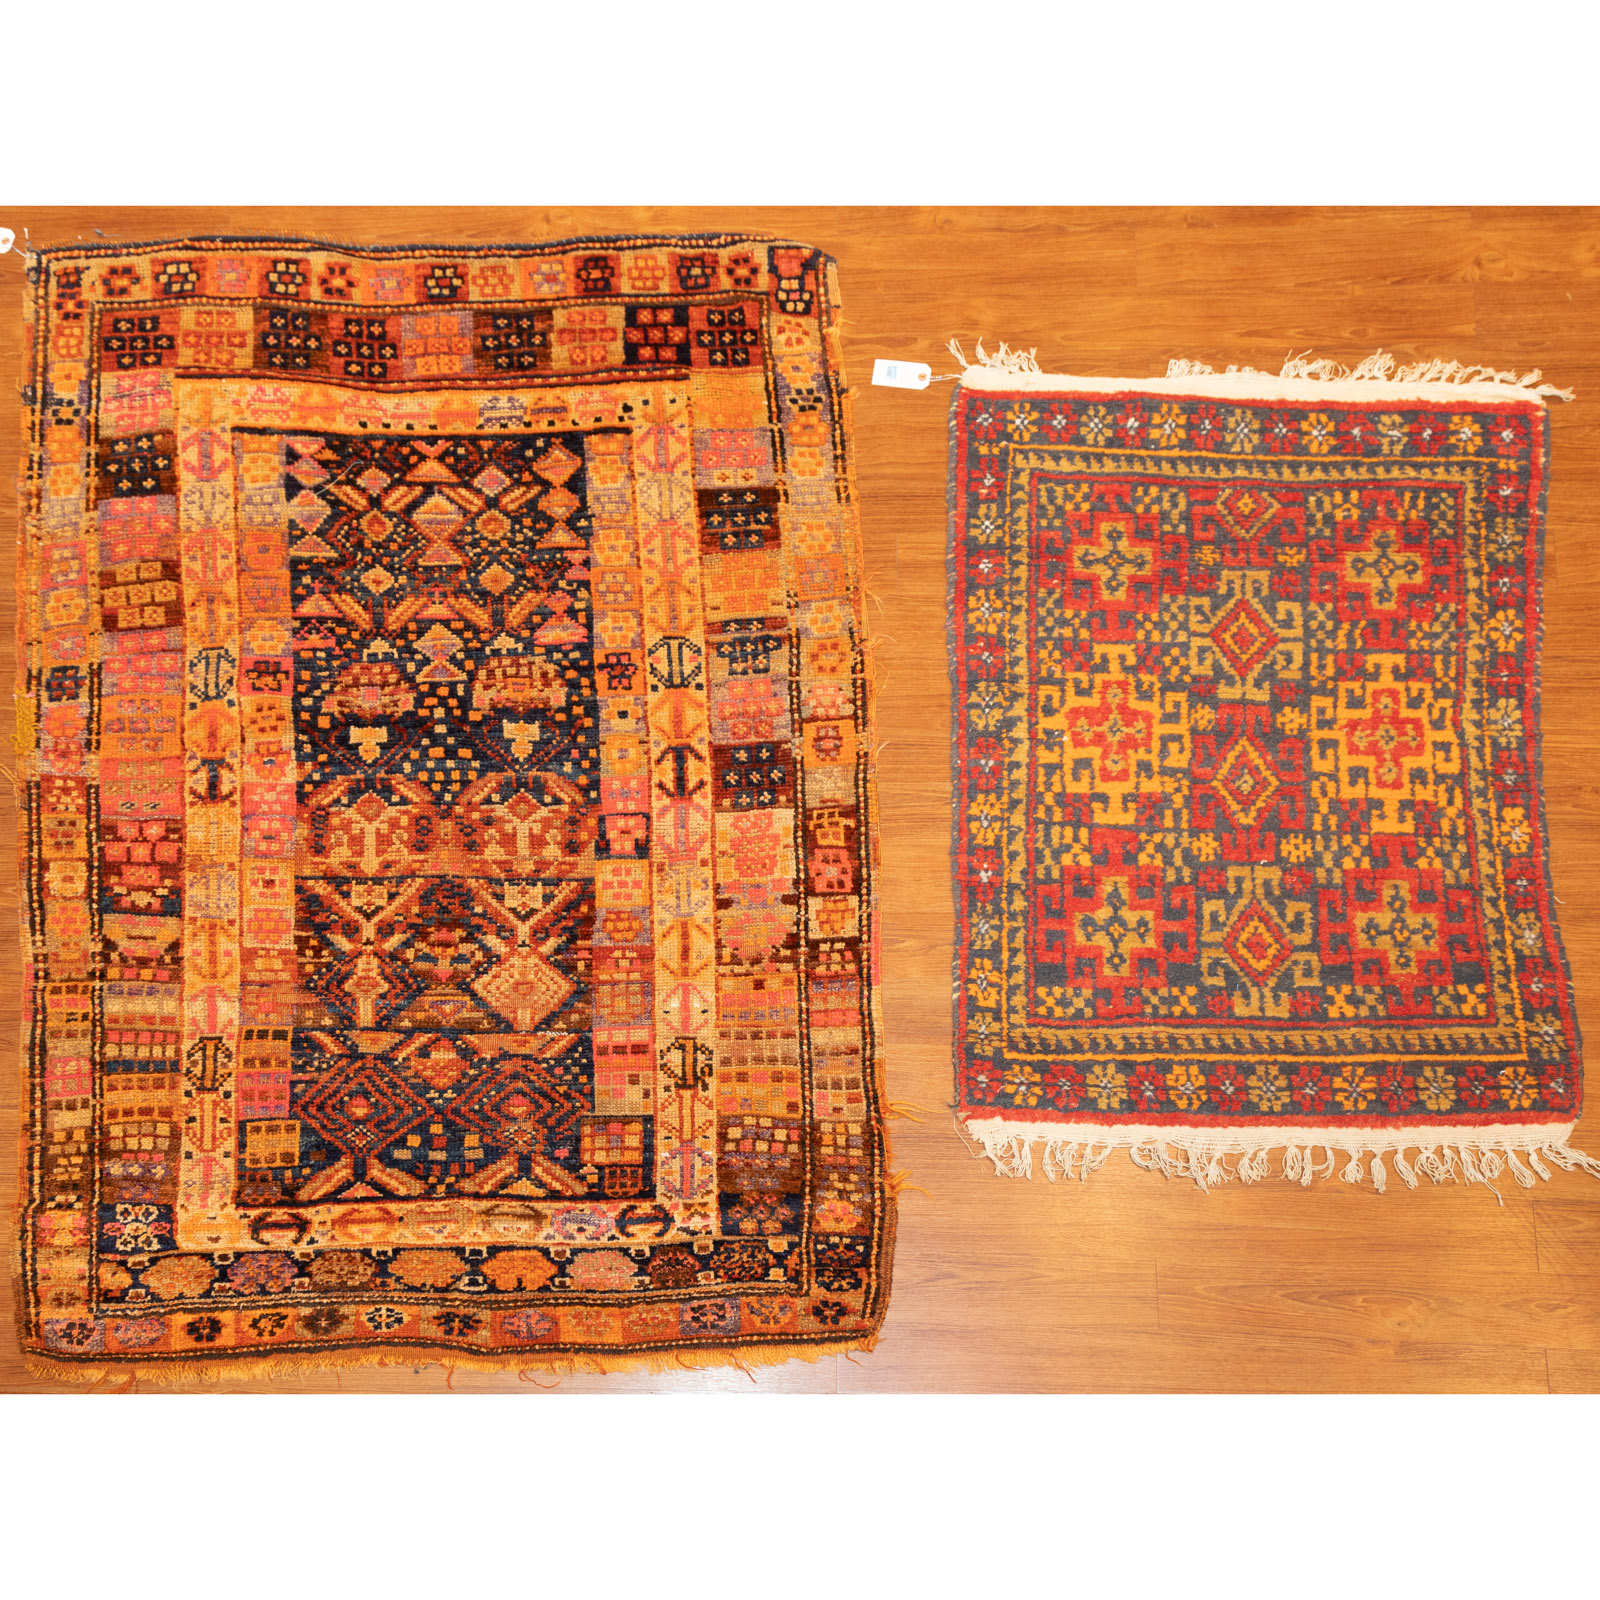 TWO TURKISH RUGS 2 8 X 3 9 AND 36a510